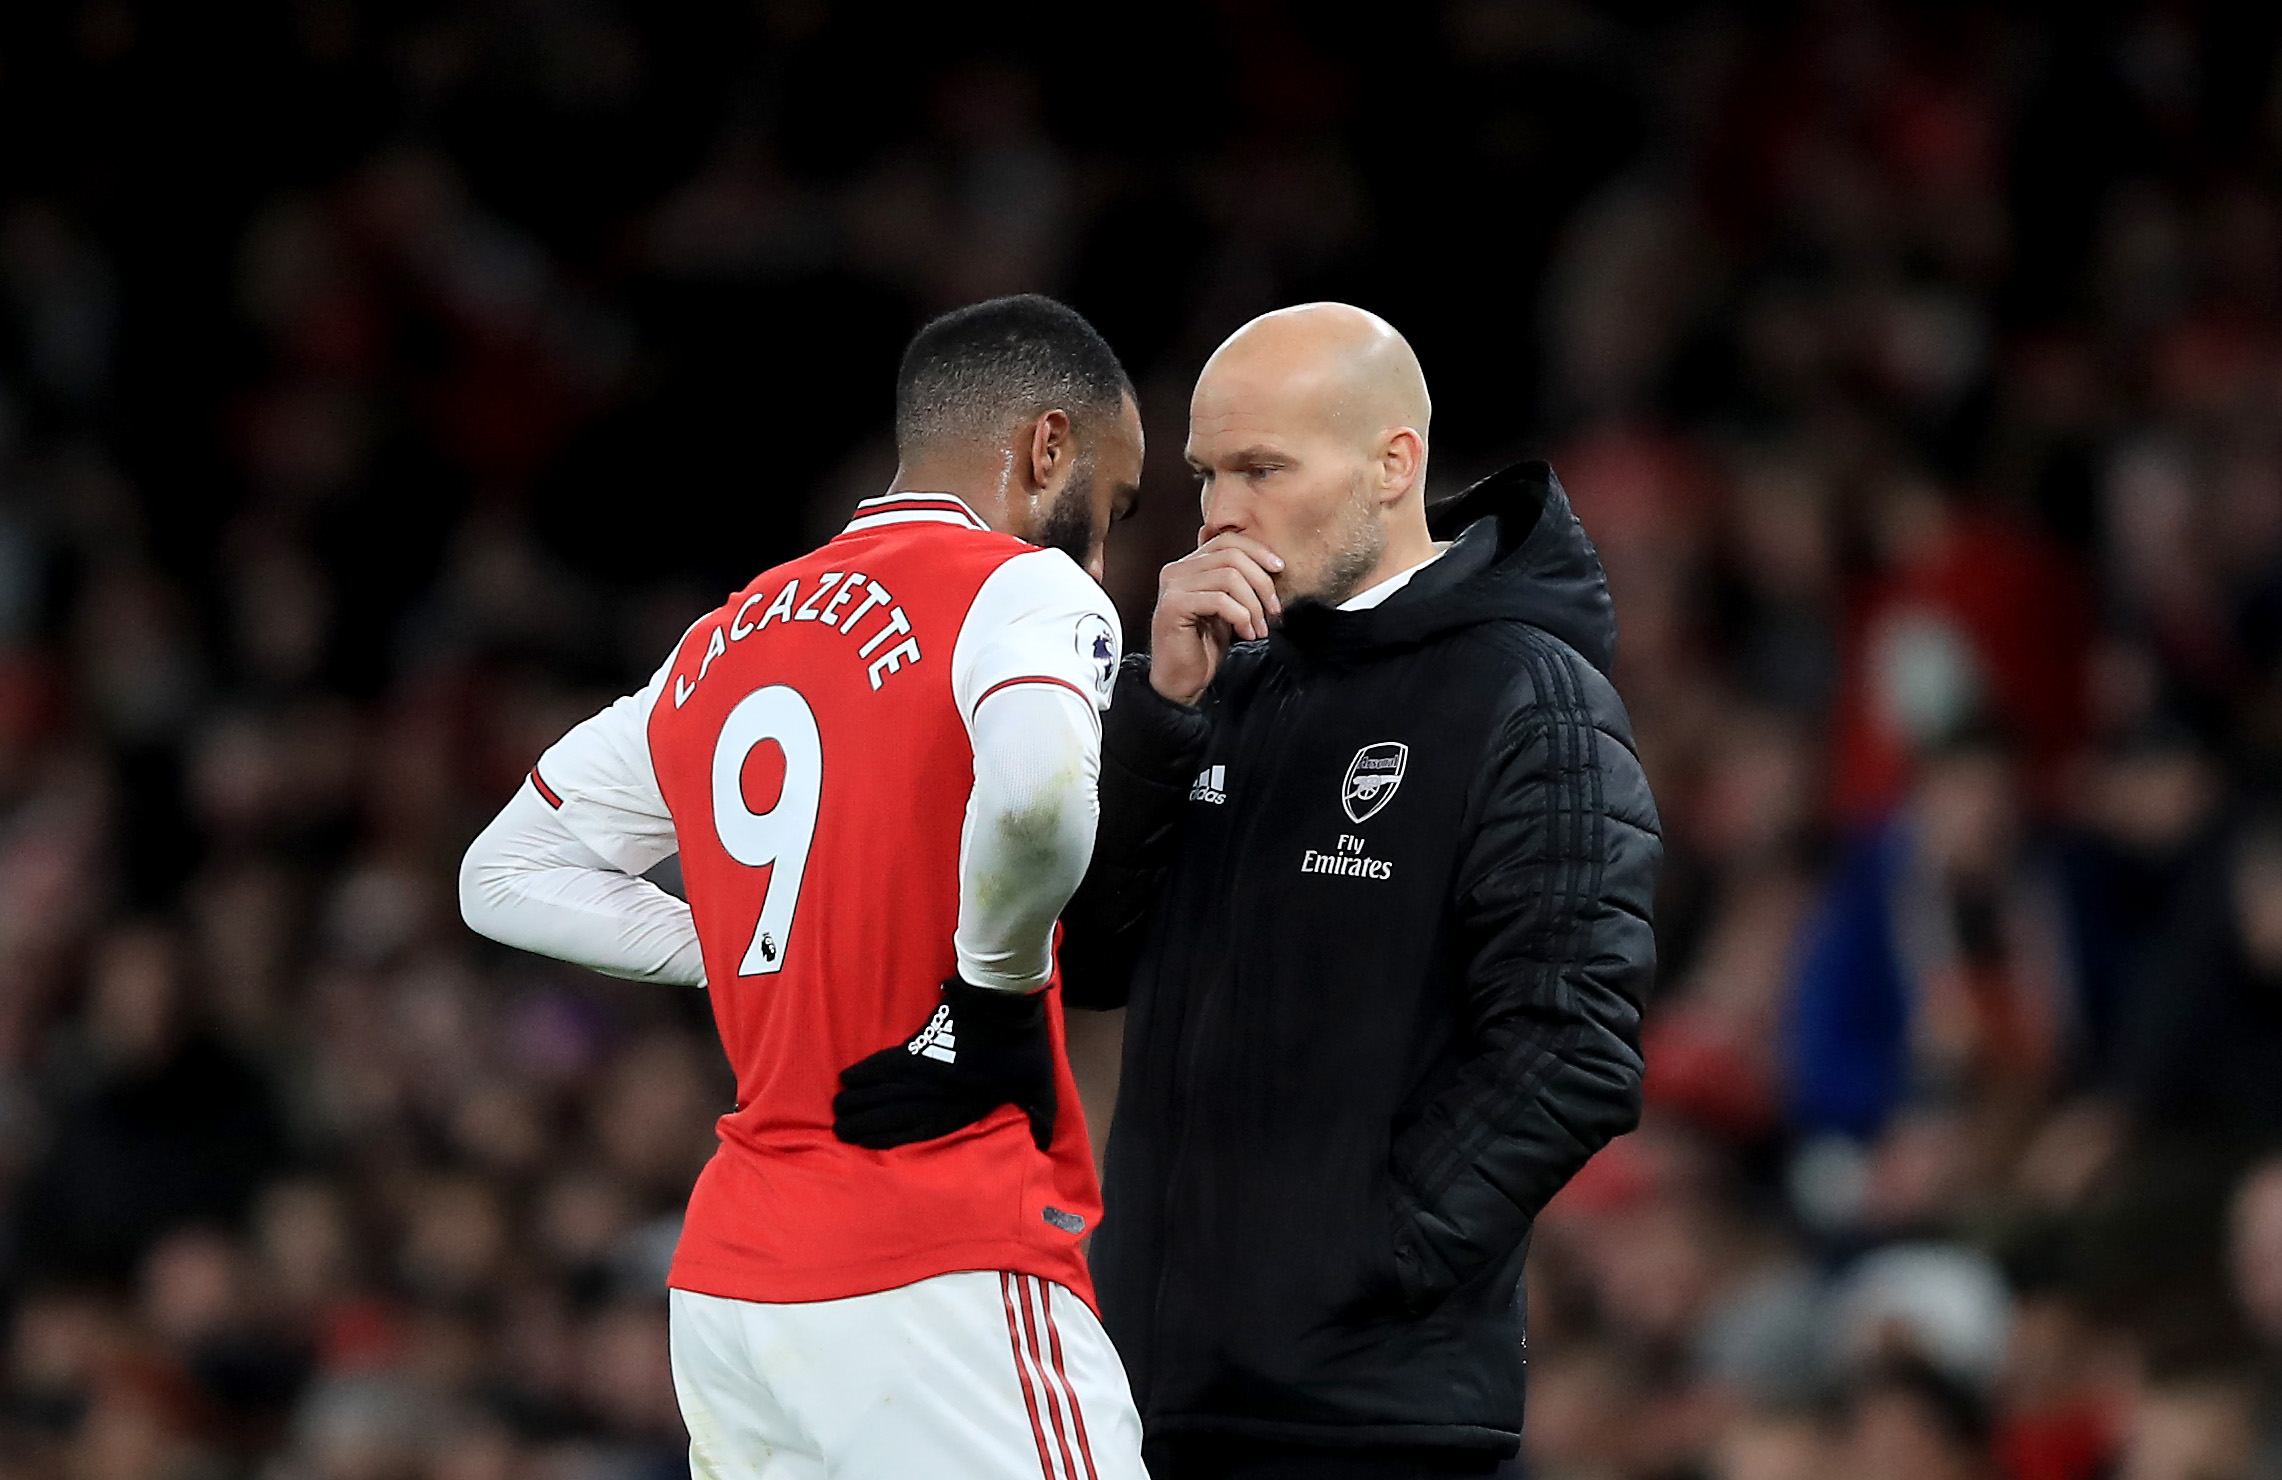 LONDON, ENGLAND - DECEMBER 05: Head coach Freddie Ljungberg of Arsenal speaks to Alexandre Lacazette of Arsenal during the Premier League match between Arsenal FC and Brighton & Hove Albion at Emirates Stadium on December 05, 2019 in London, United Kingdom. (Photo by Marc Atkins/Getty Images)